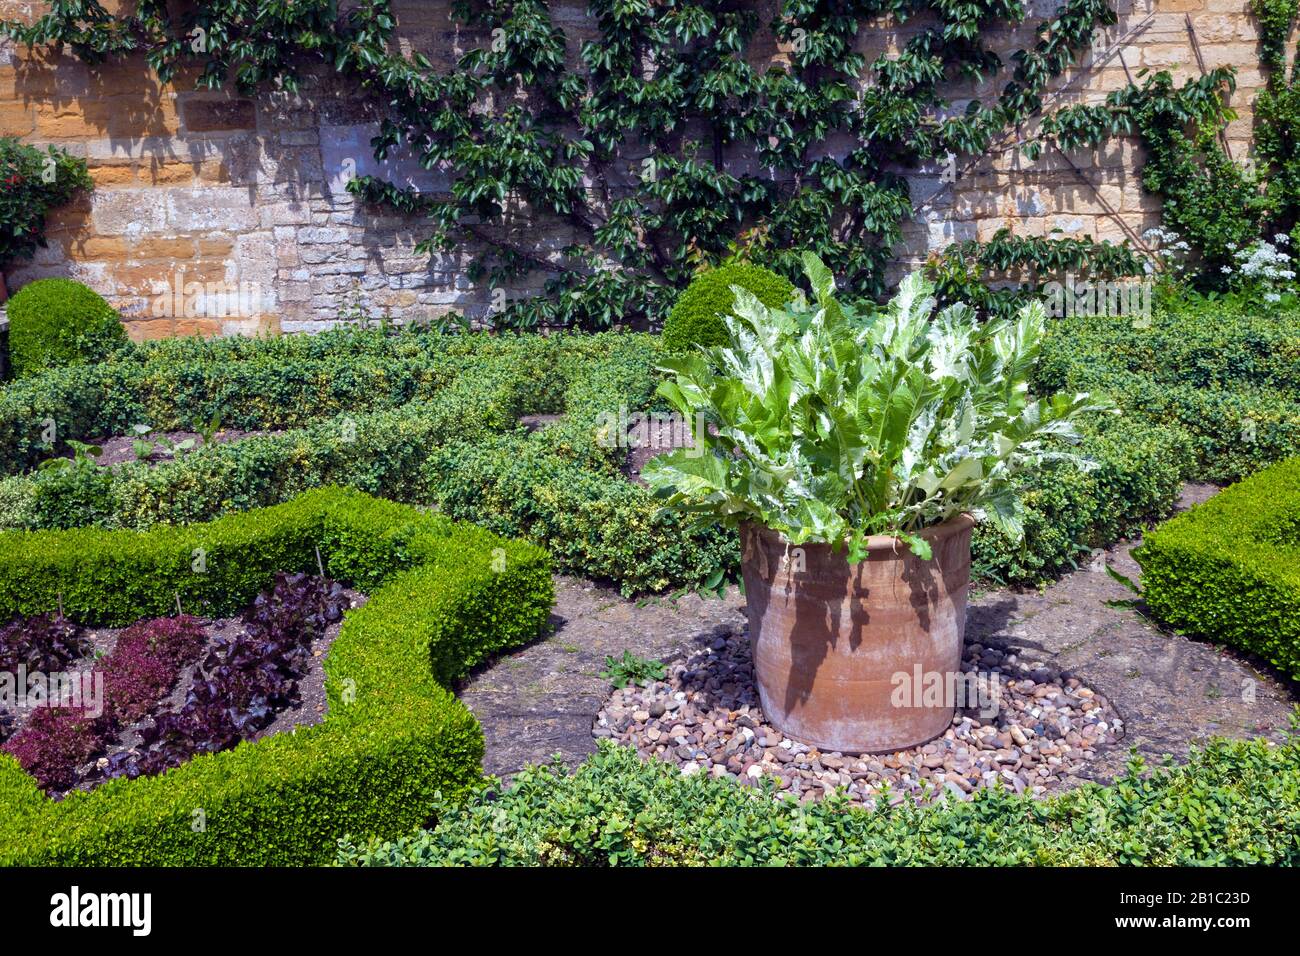 Horseradish in a clay pot, lettuce and herbs growing in plots enclosed by a trimmed hedge in a summer Ornamental vegetable garden . Stock Photo